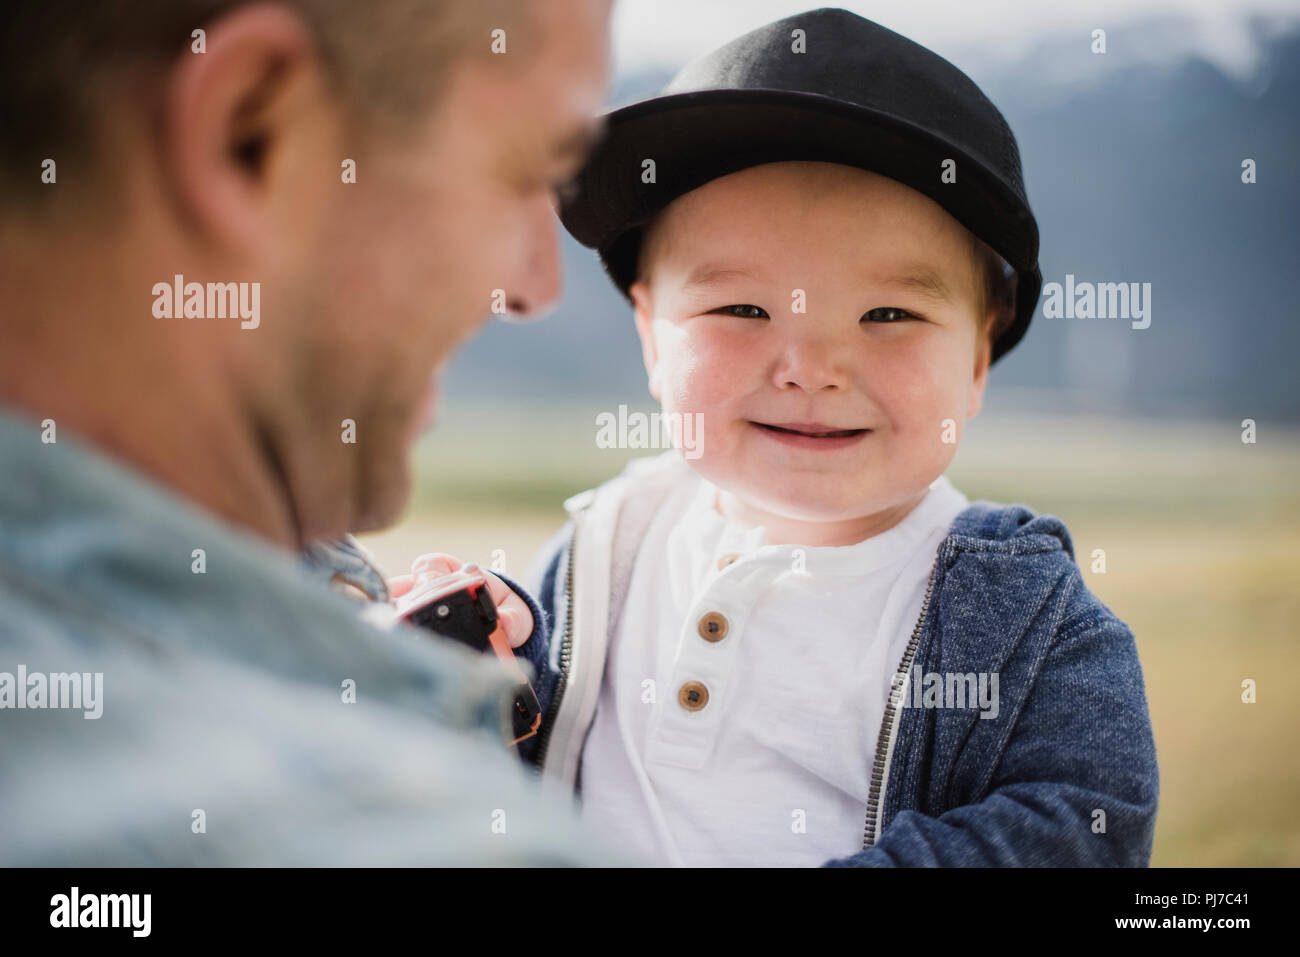 Portrait cute baby boy over father s shoulder Stock Photo